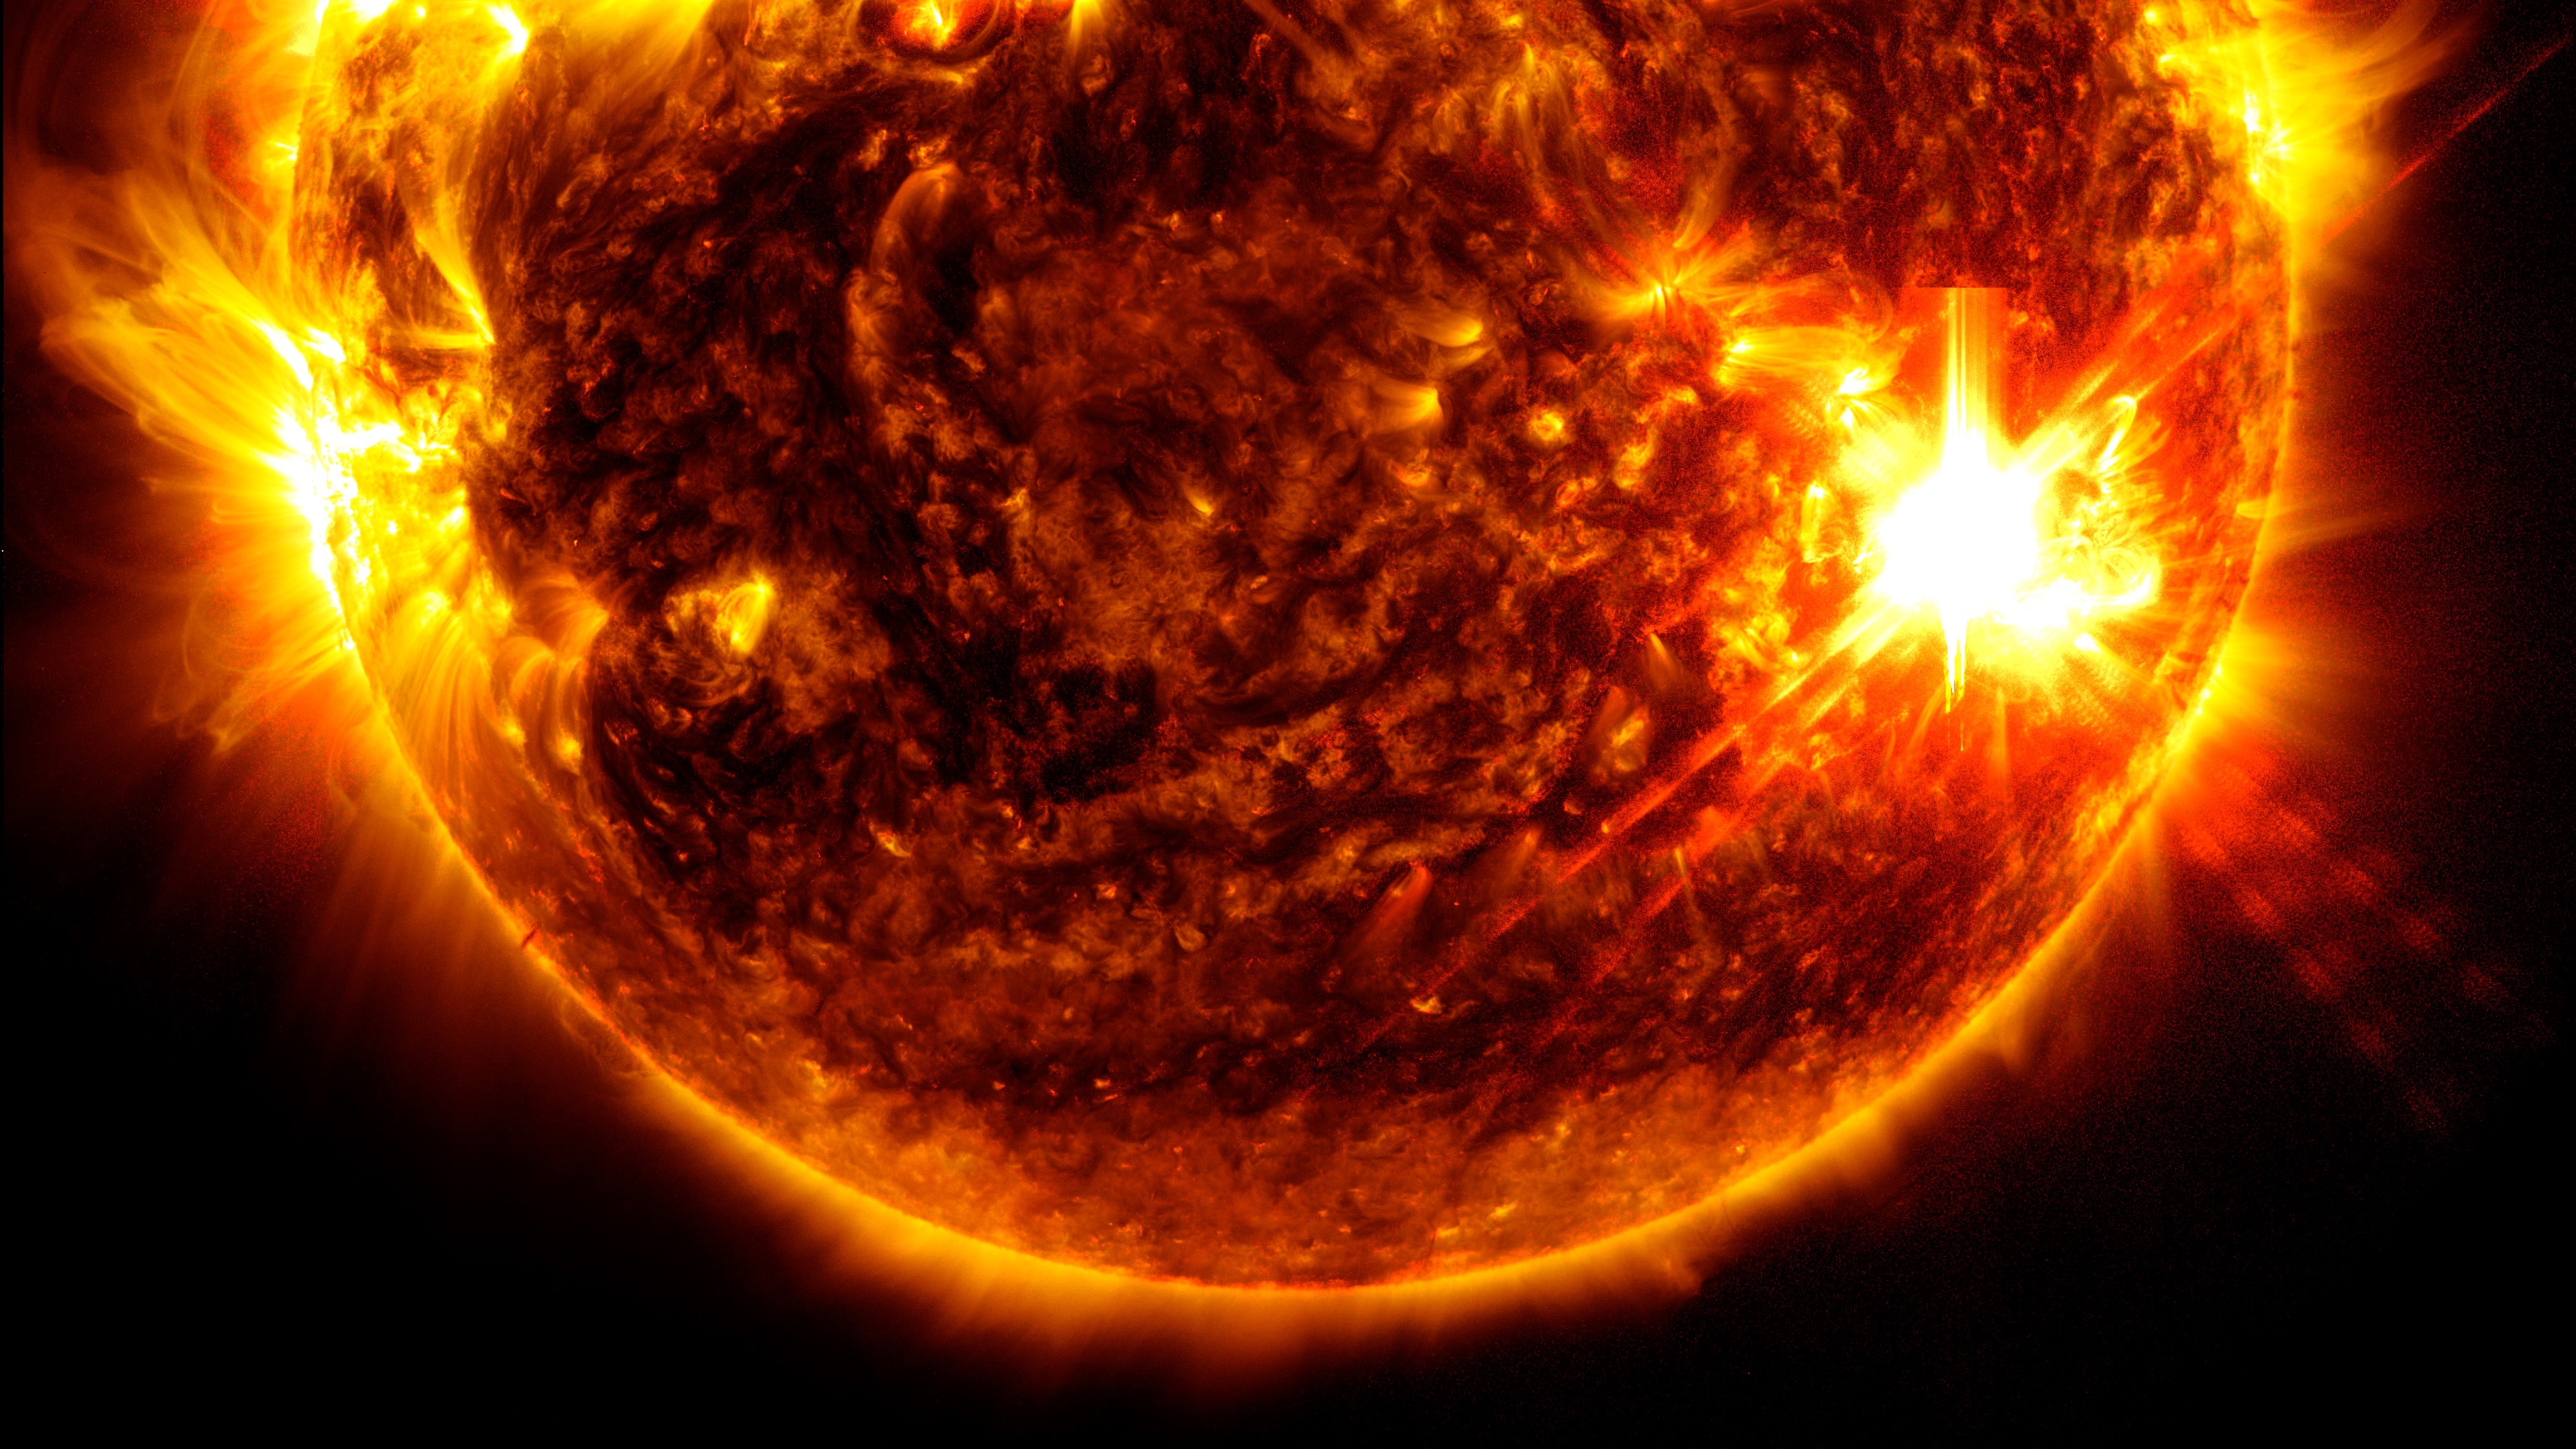 India’s space agency has been carefully watching our sun’s solar tantrums Space